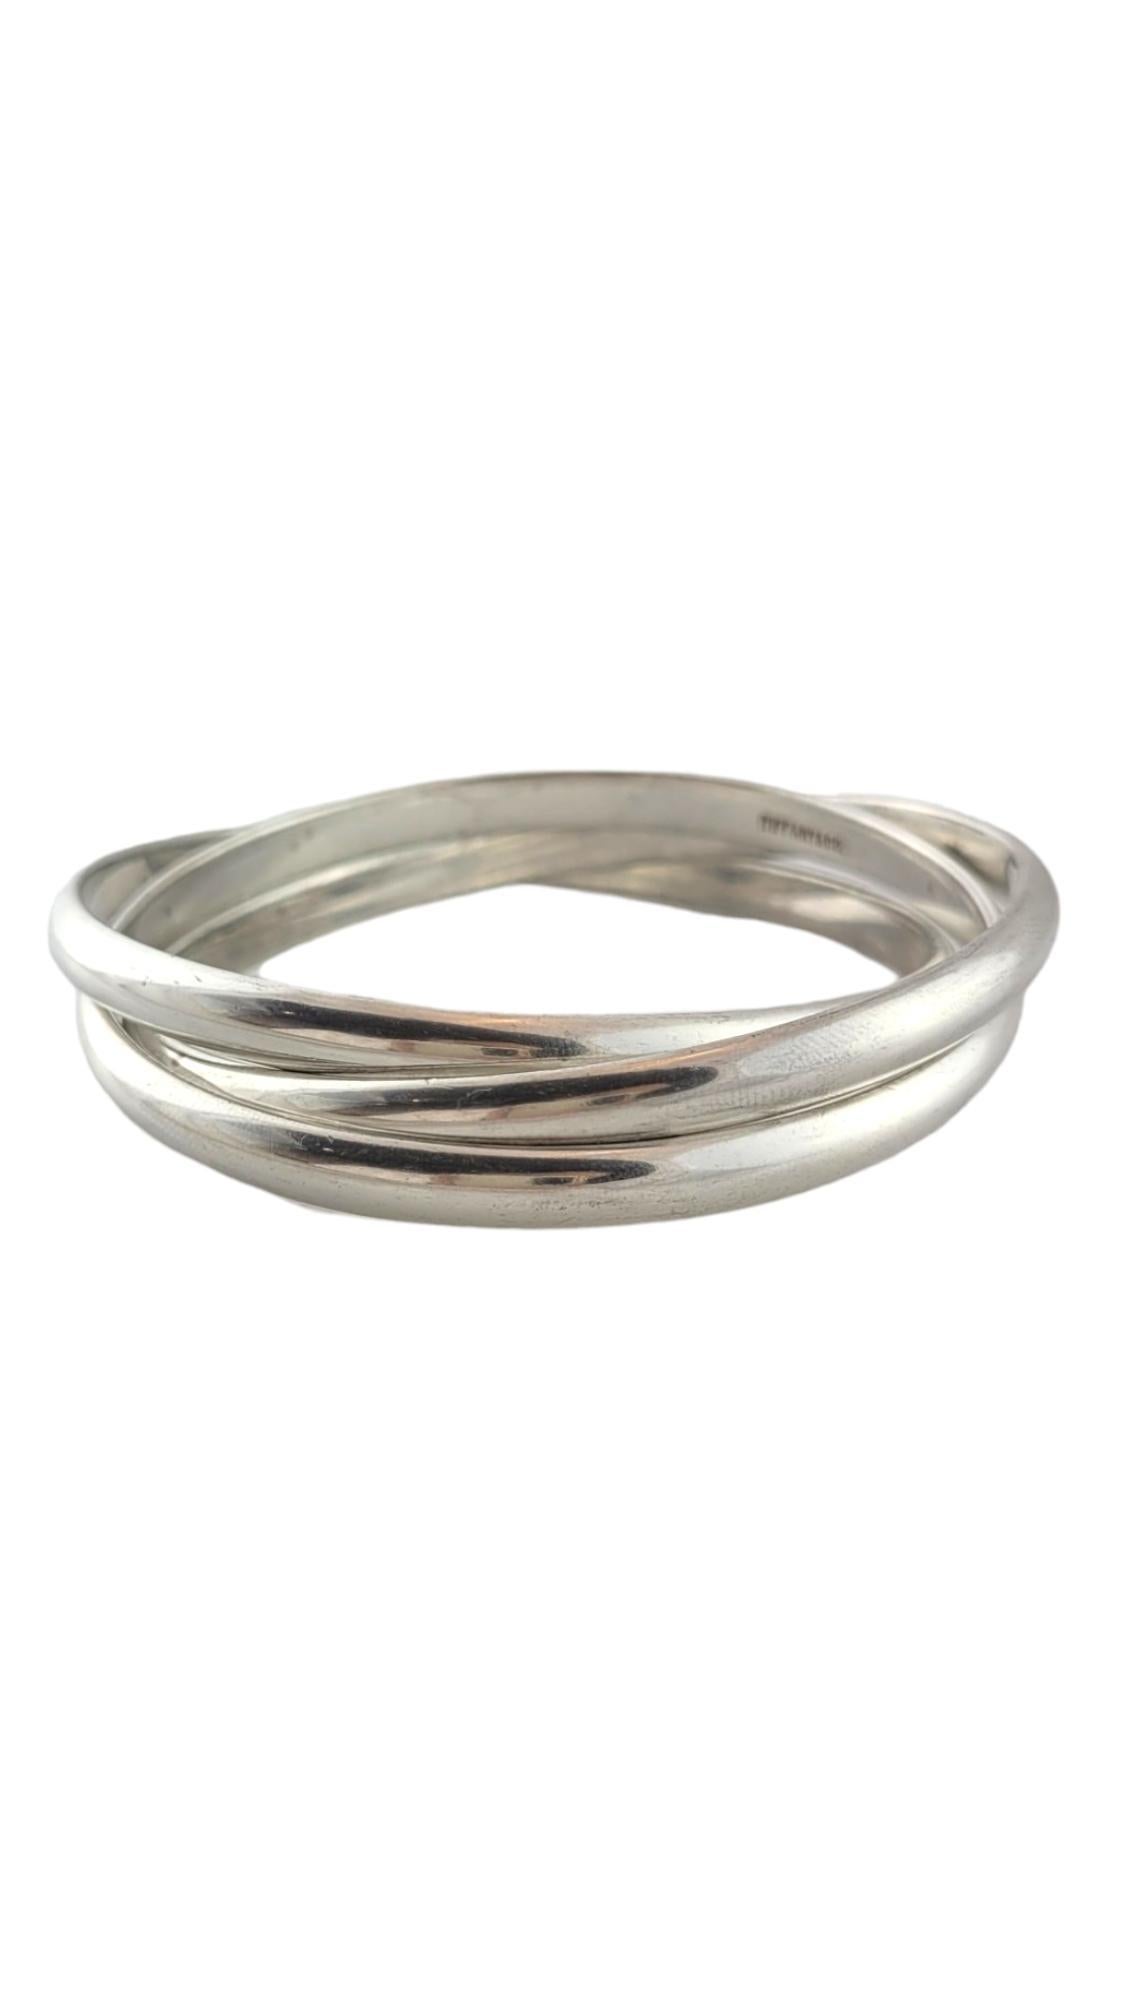 Vintage Tiffany & Co. Sterling Silver Rolling Bangle Bracelet

This gorgeous rolling three bangle bracelet by designer Tiffany & Co. is crafted from sterling silver!

Size: 7.75